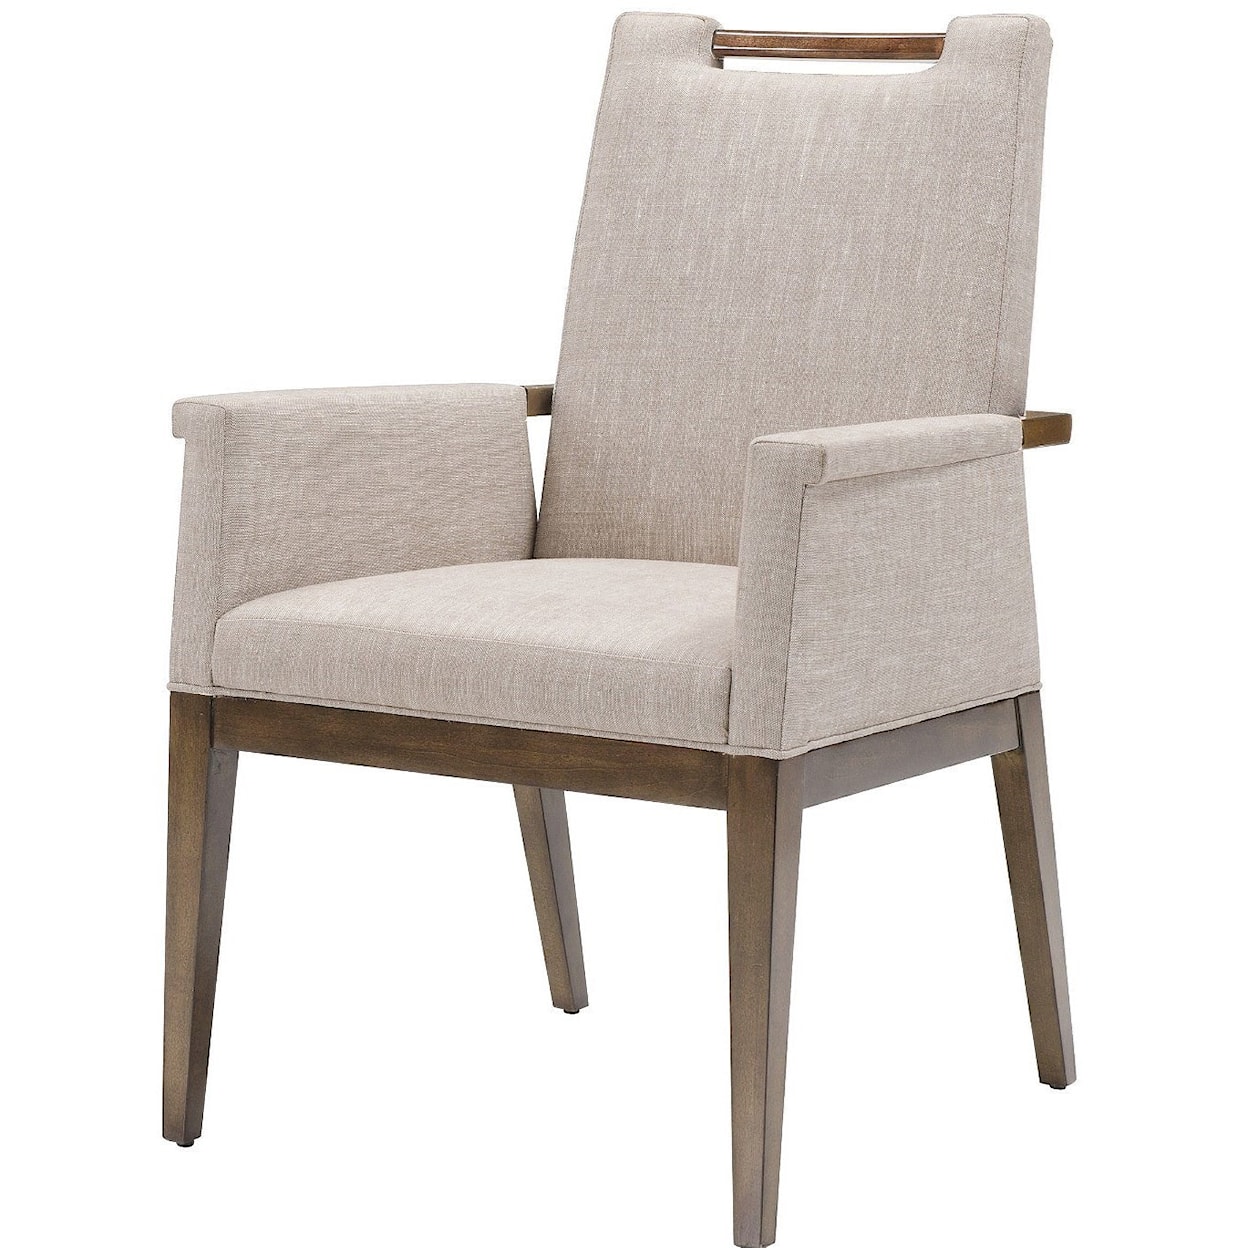 Belle Meade Signature Accent Chairs Liv Arm Chair